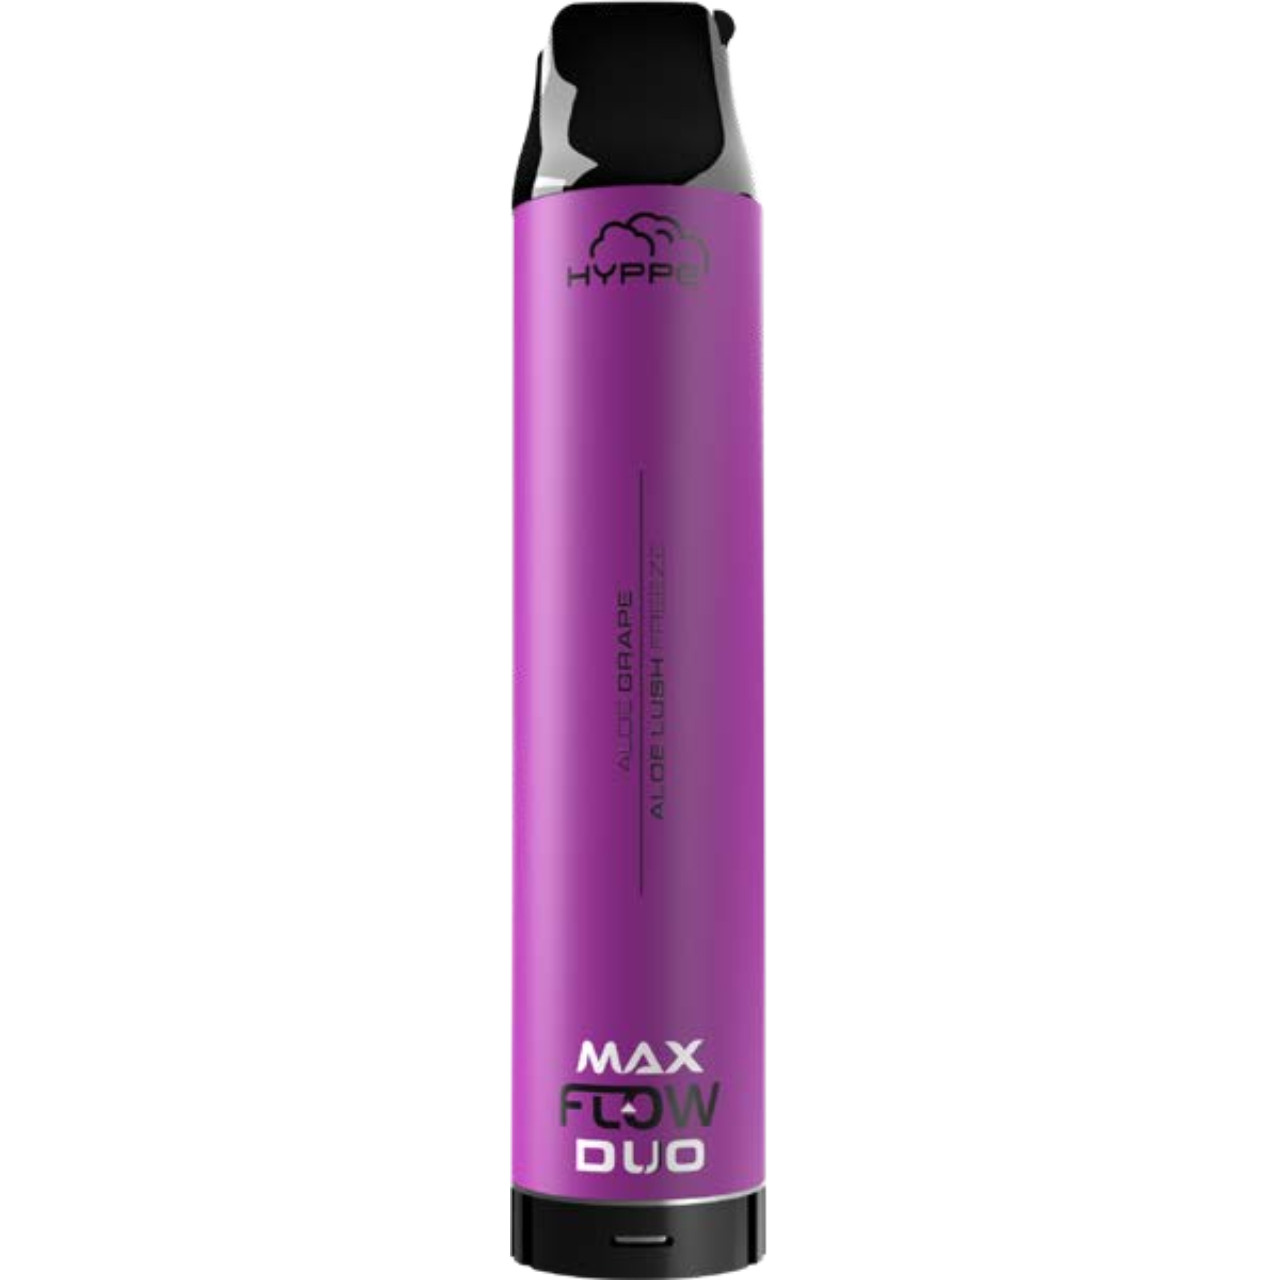 HYPPE MAX Flow DUO 5000 Puff Disposable